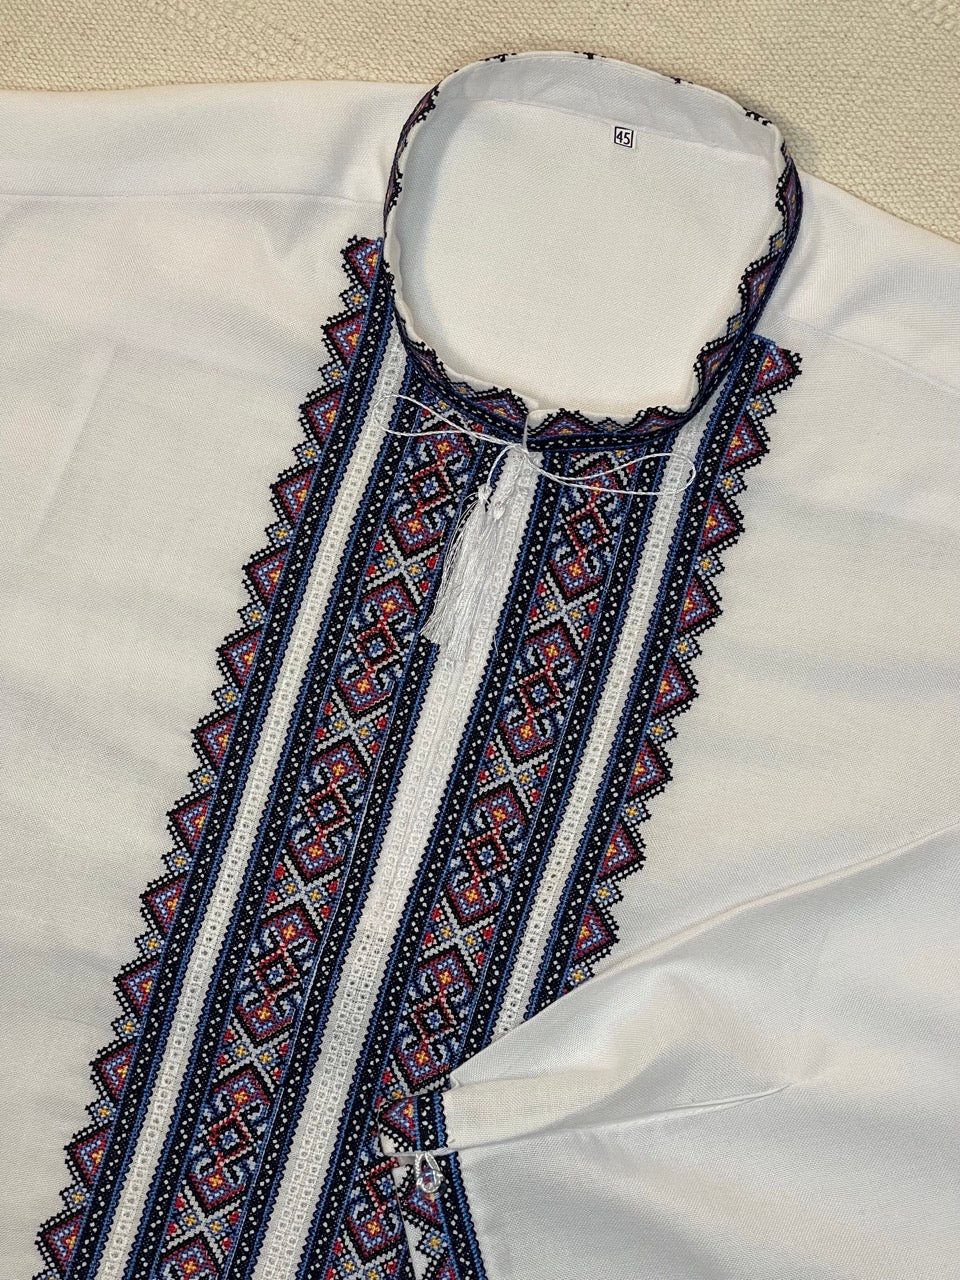 White Men's Vyshyvanka Shirt with Colourful Embroidery